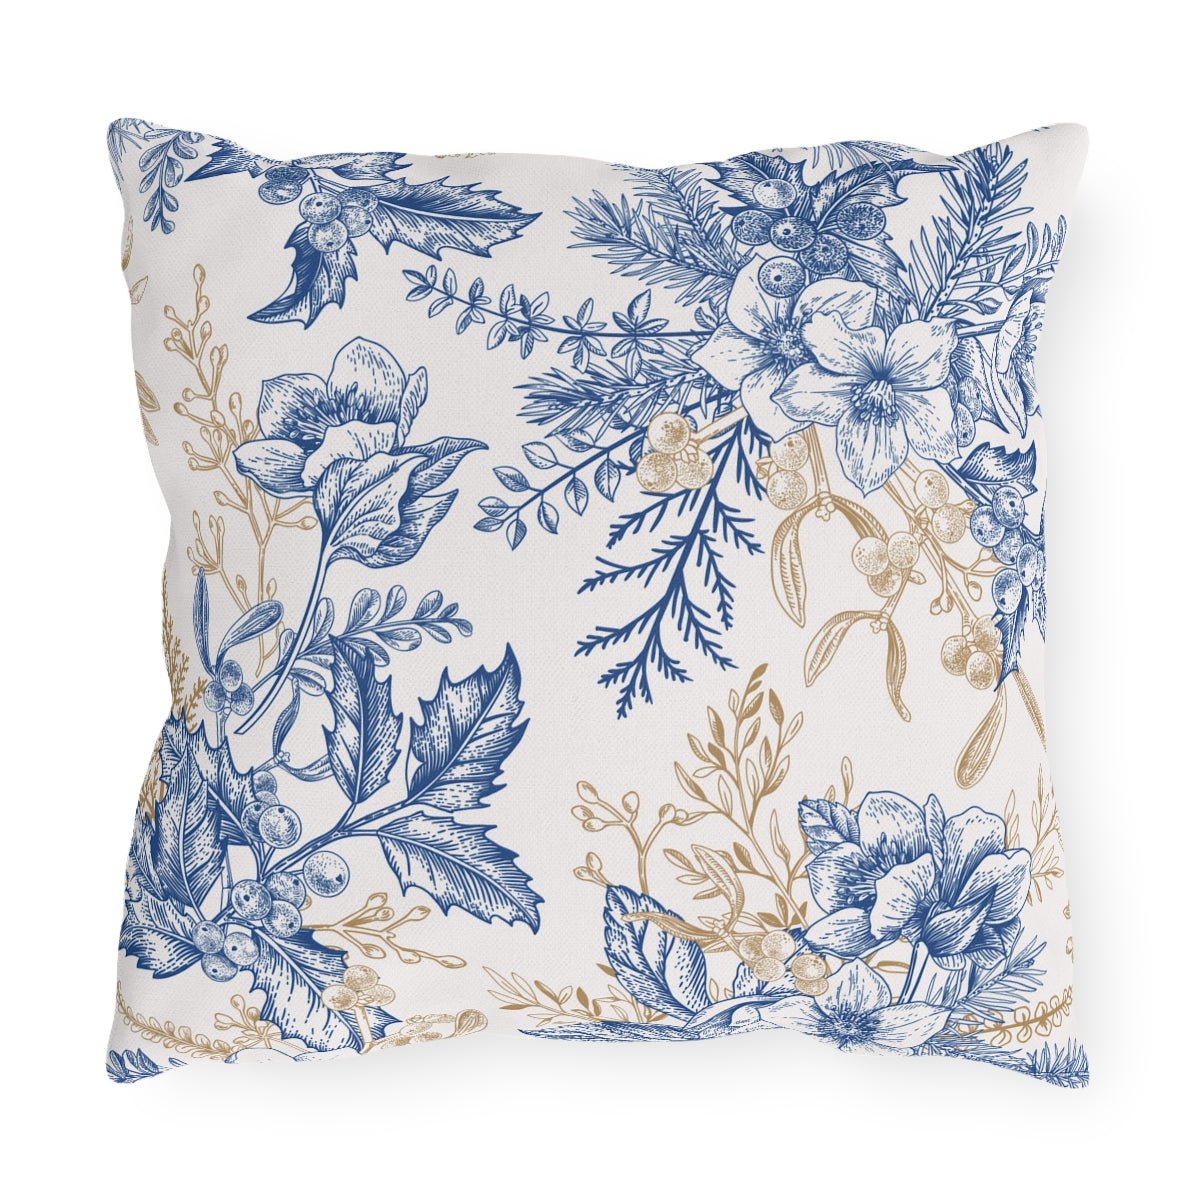 Winter Hellebore Flowers Outdoor Pillow - Puffin Lime